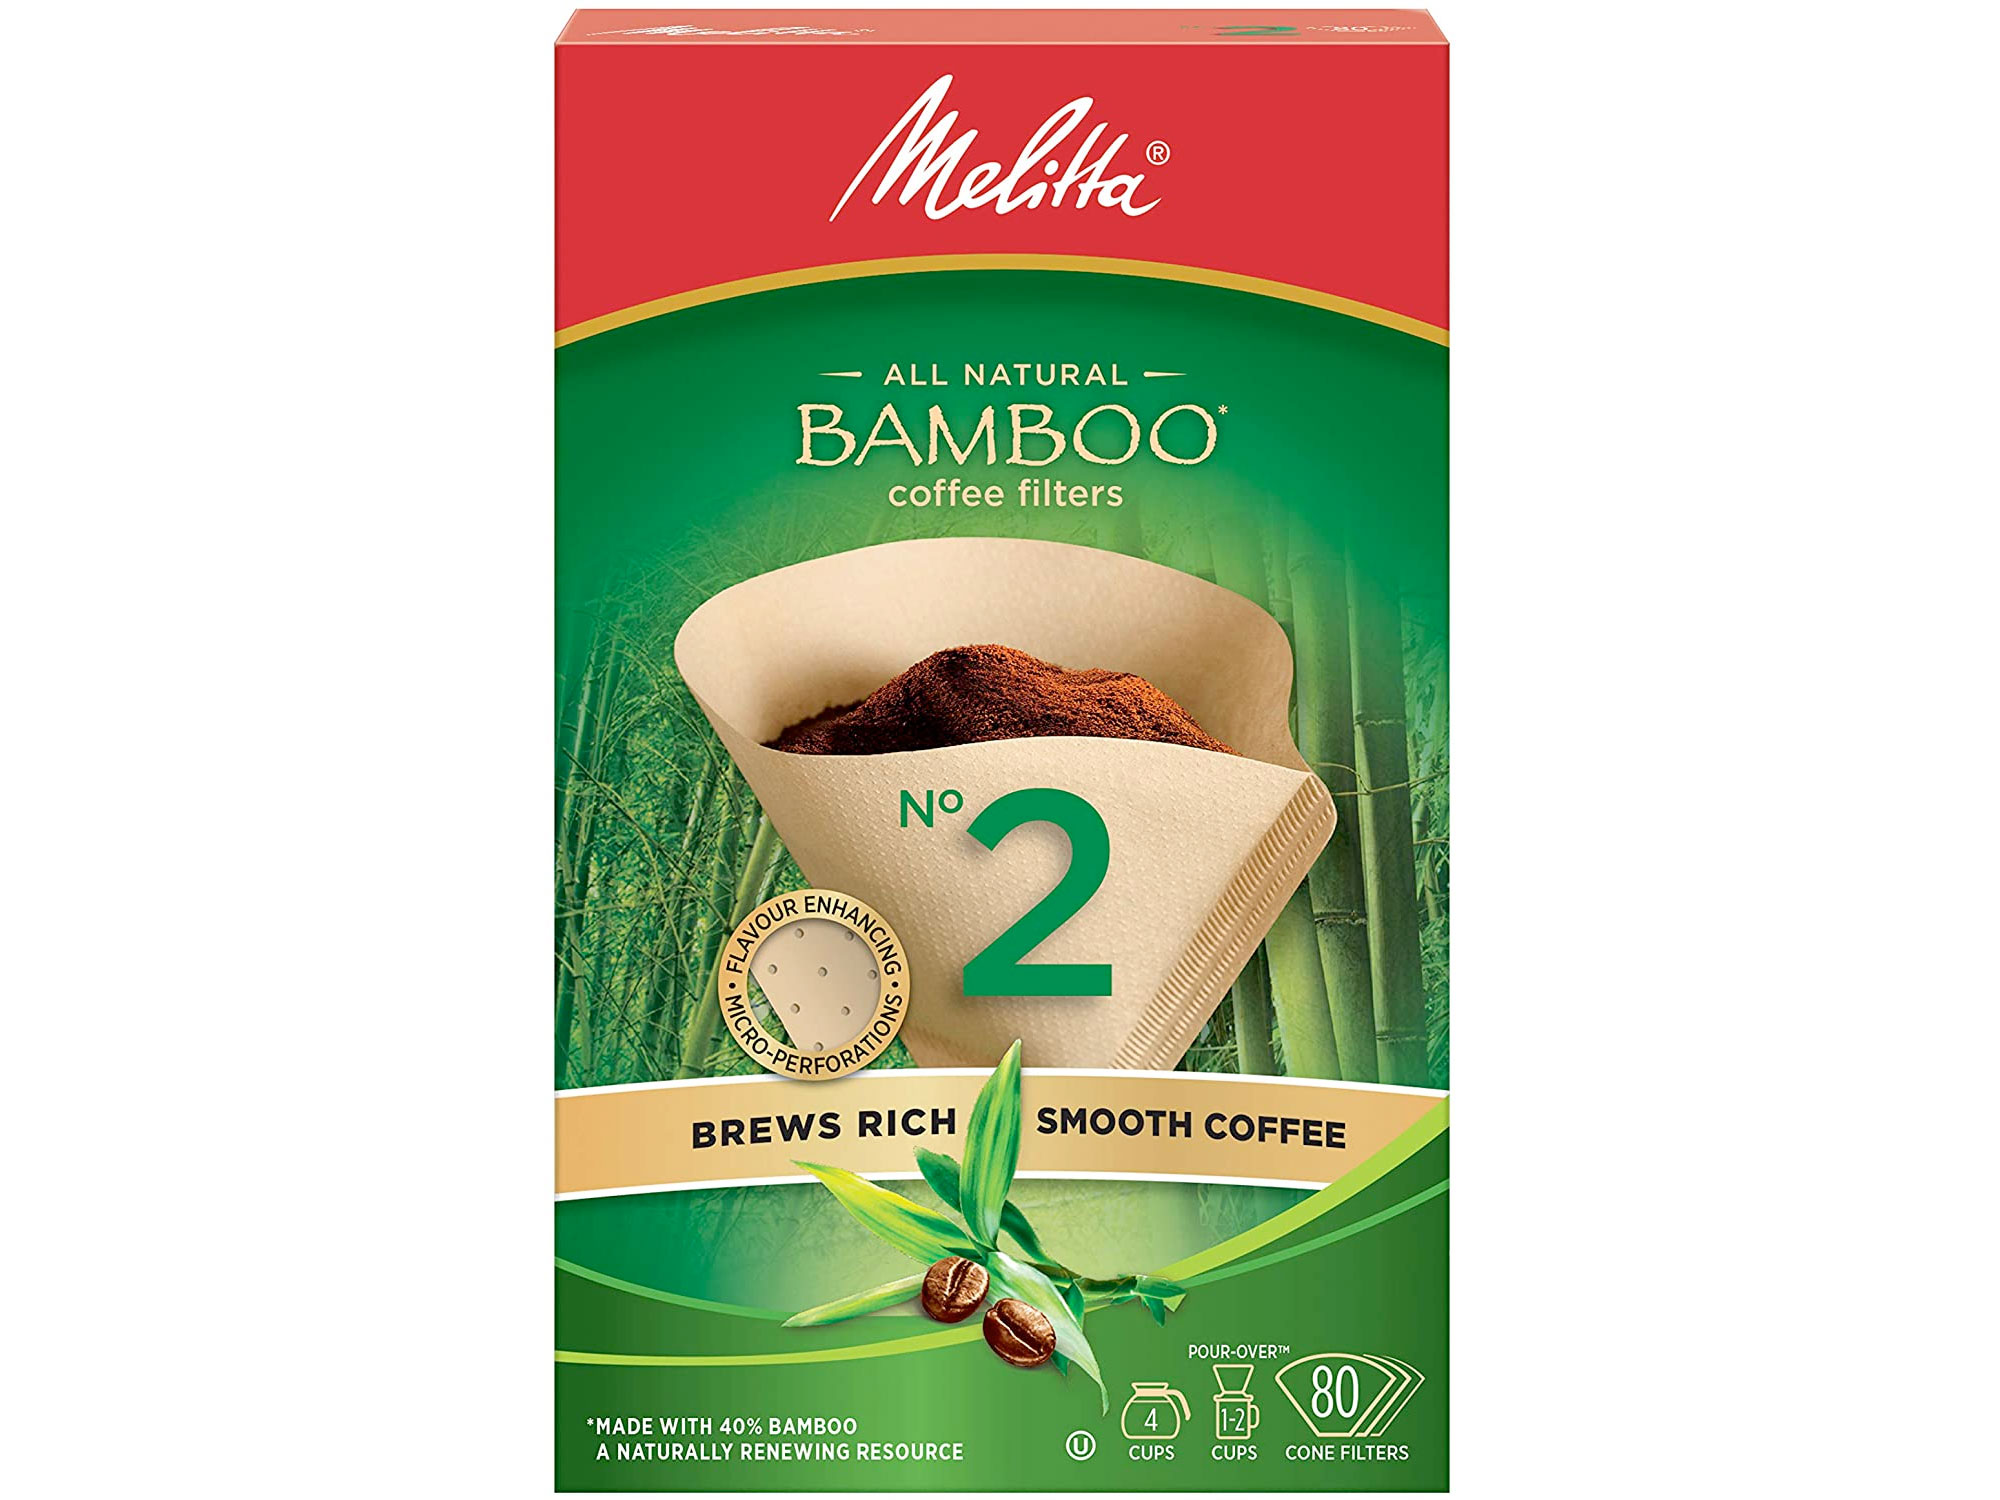 Amazon：Melitta Bamboo Coffee Filters No 2 (80 Count)只卖$3.98